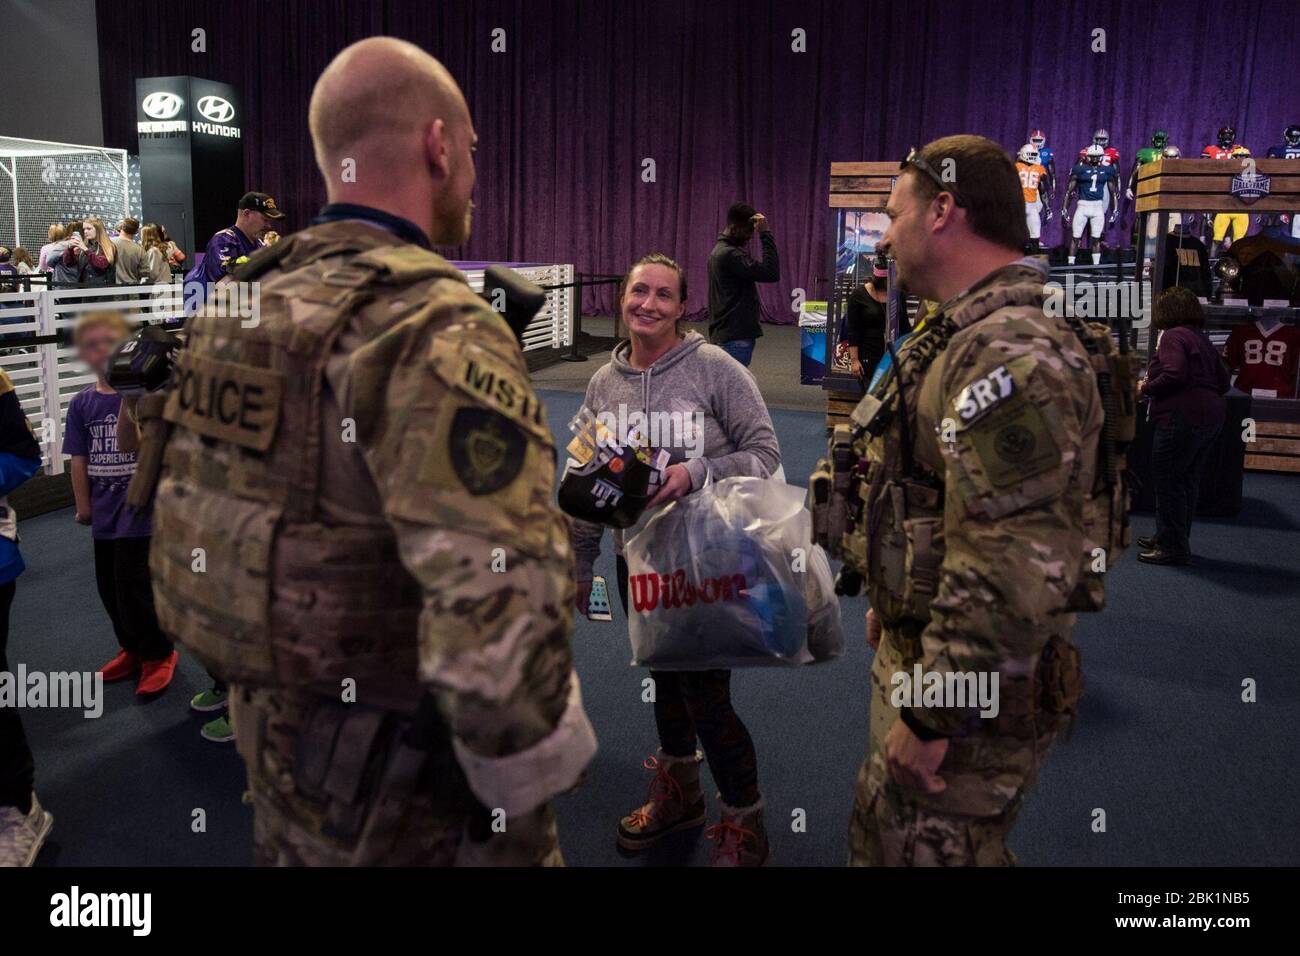 Hsi Srt Security At The Minneapolis Convention Center Stock Photo Alamy